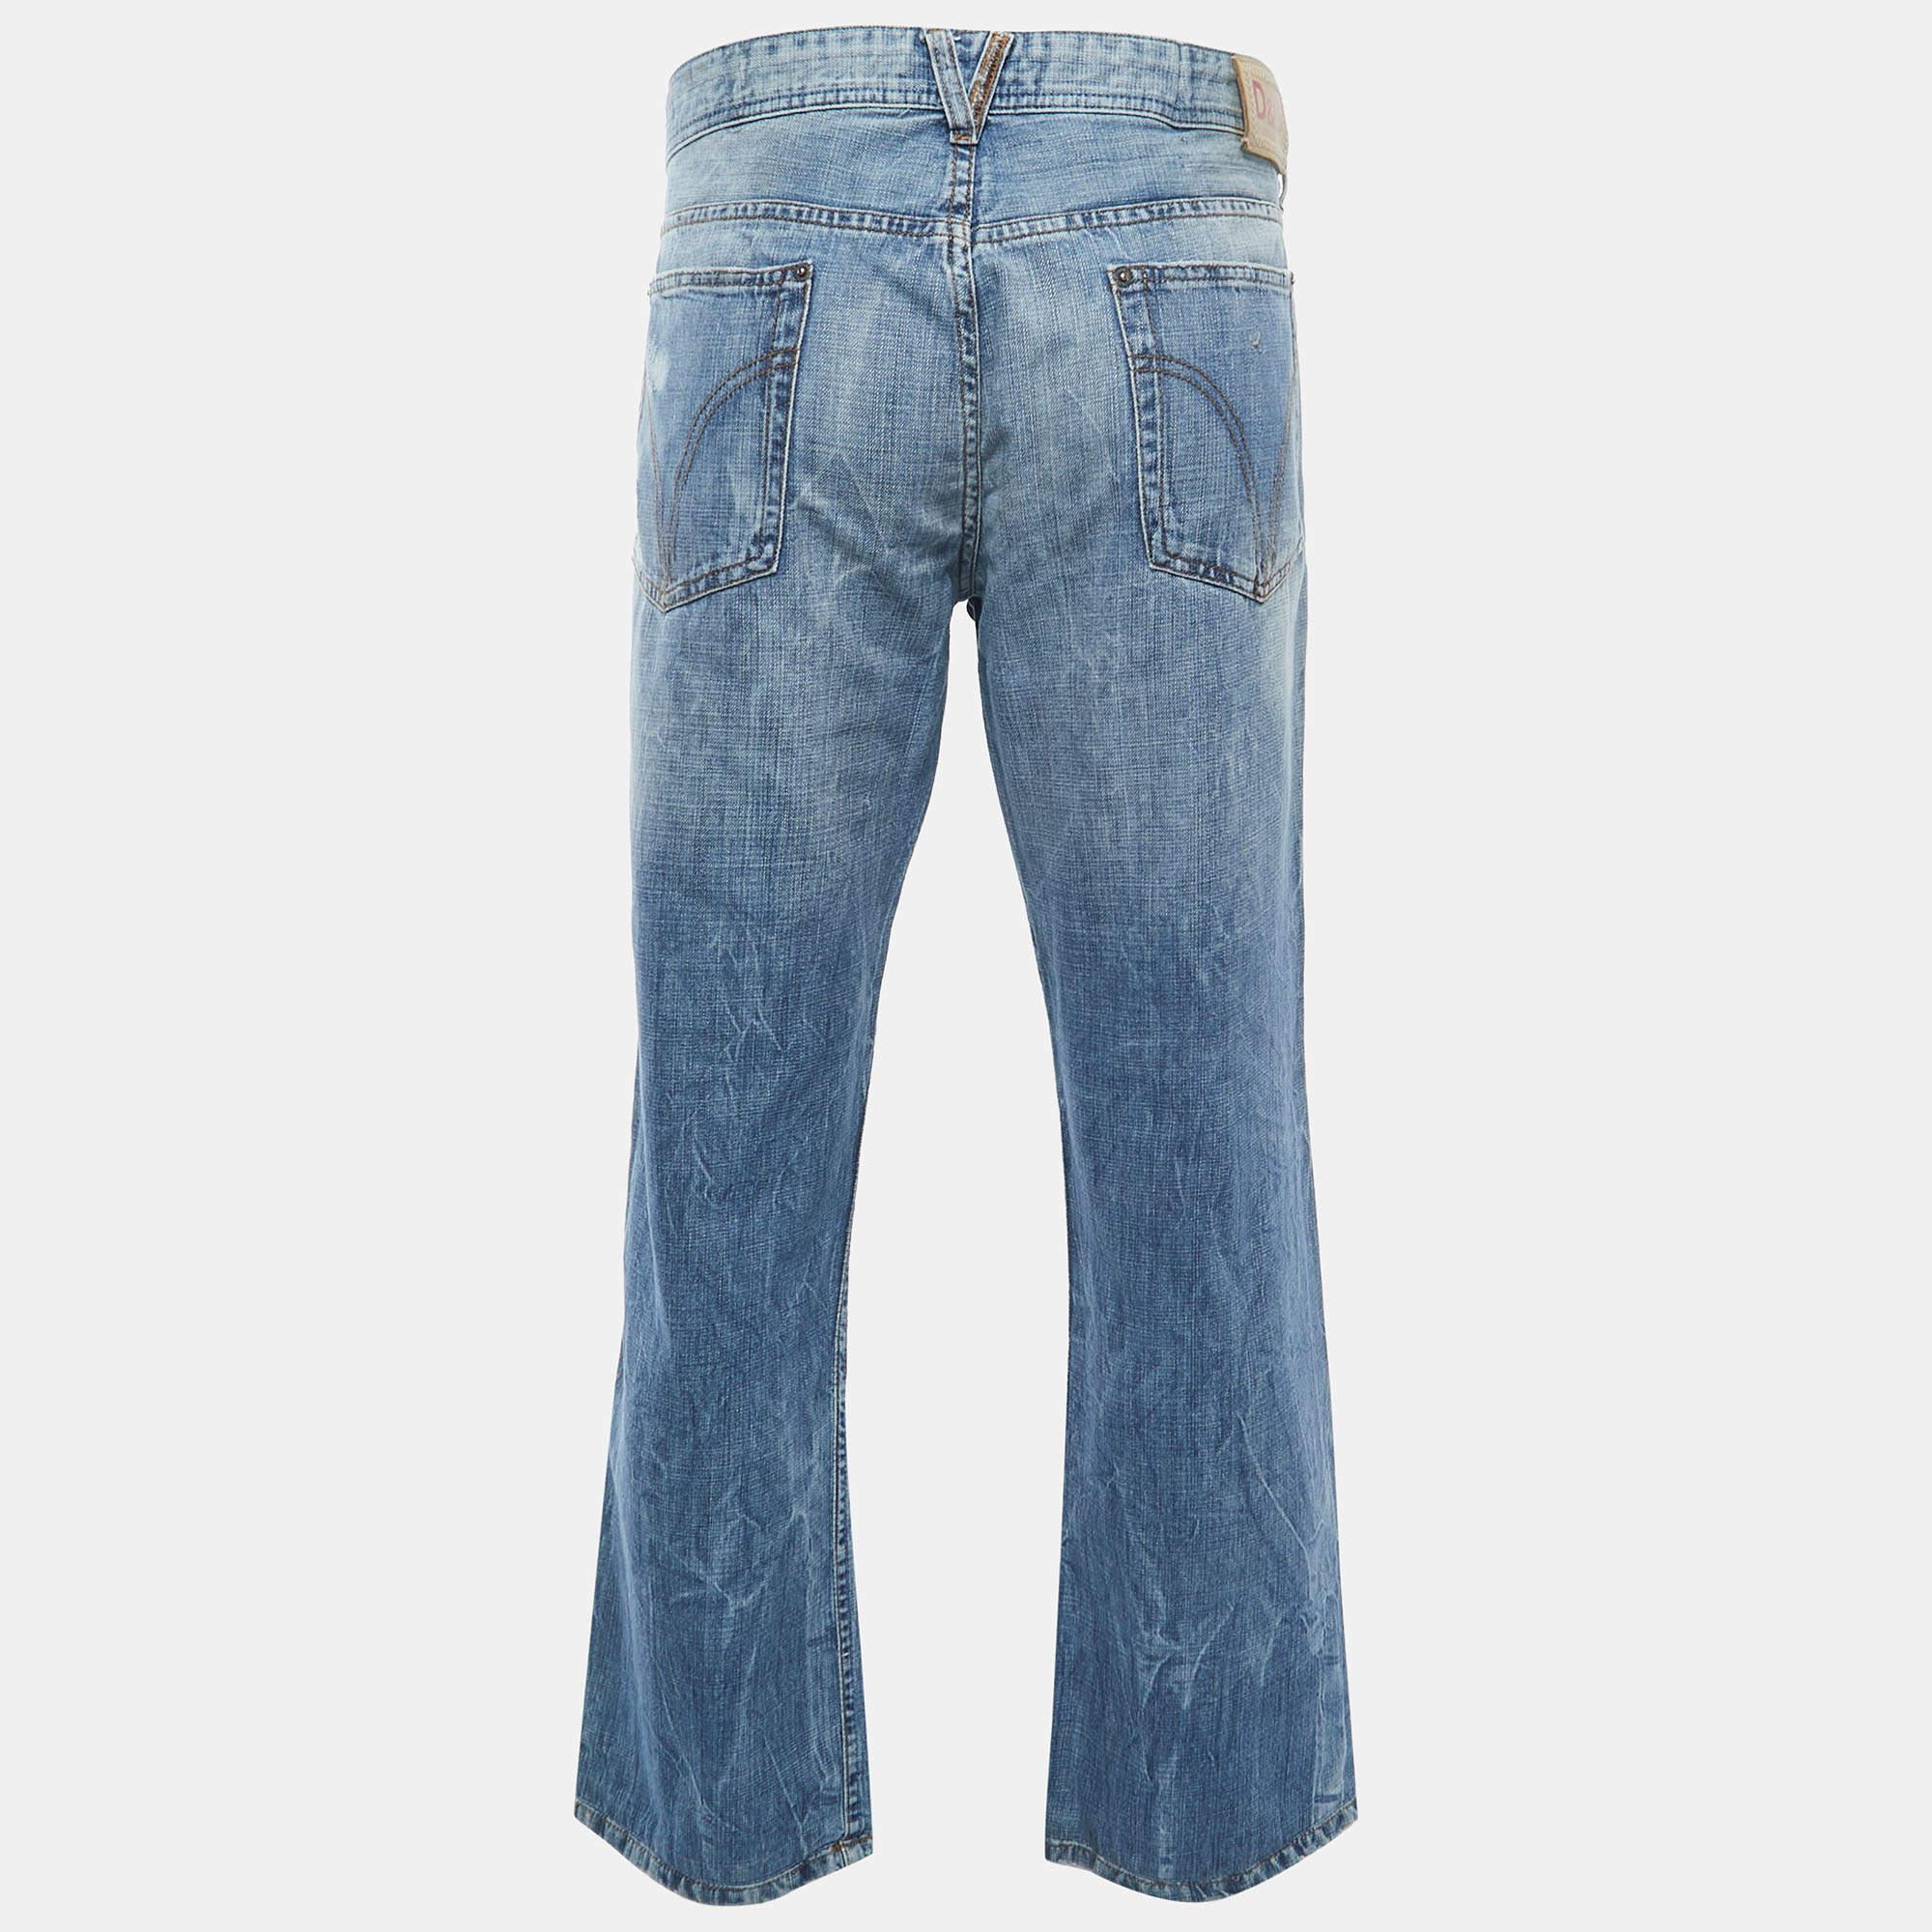 A good pair of jeans always makes the closet complete. This pair of jeans is tailored with such skill and style that it will be your favorite in no time. It will give you a comfortable, stylish fit.

